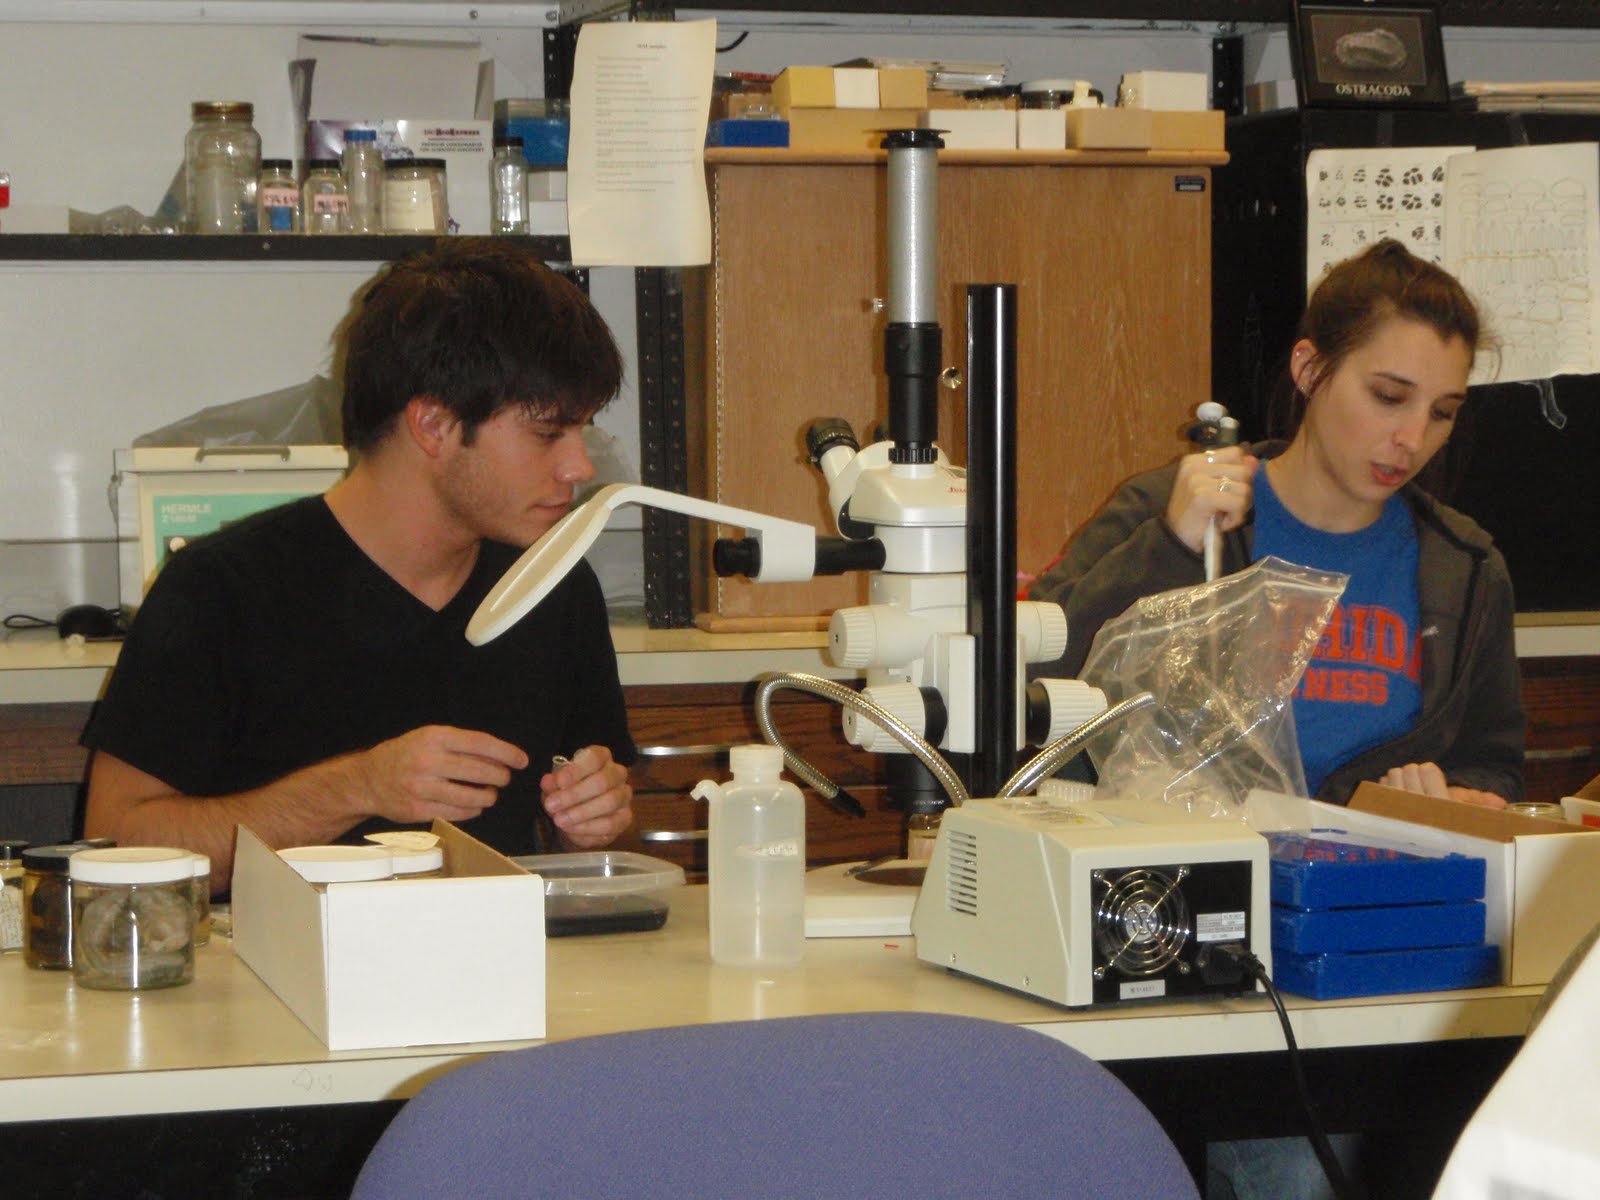 JD and Laura at a desk with specimens. Laura has a pipette.